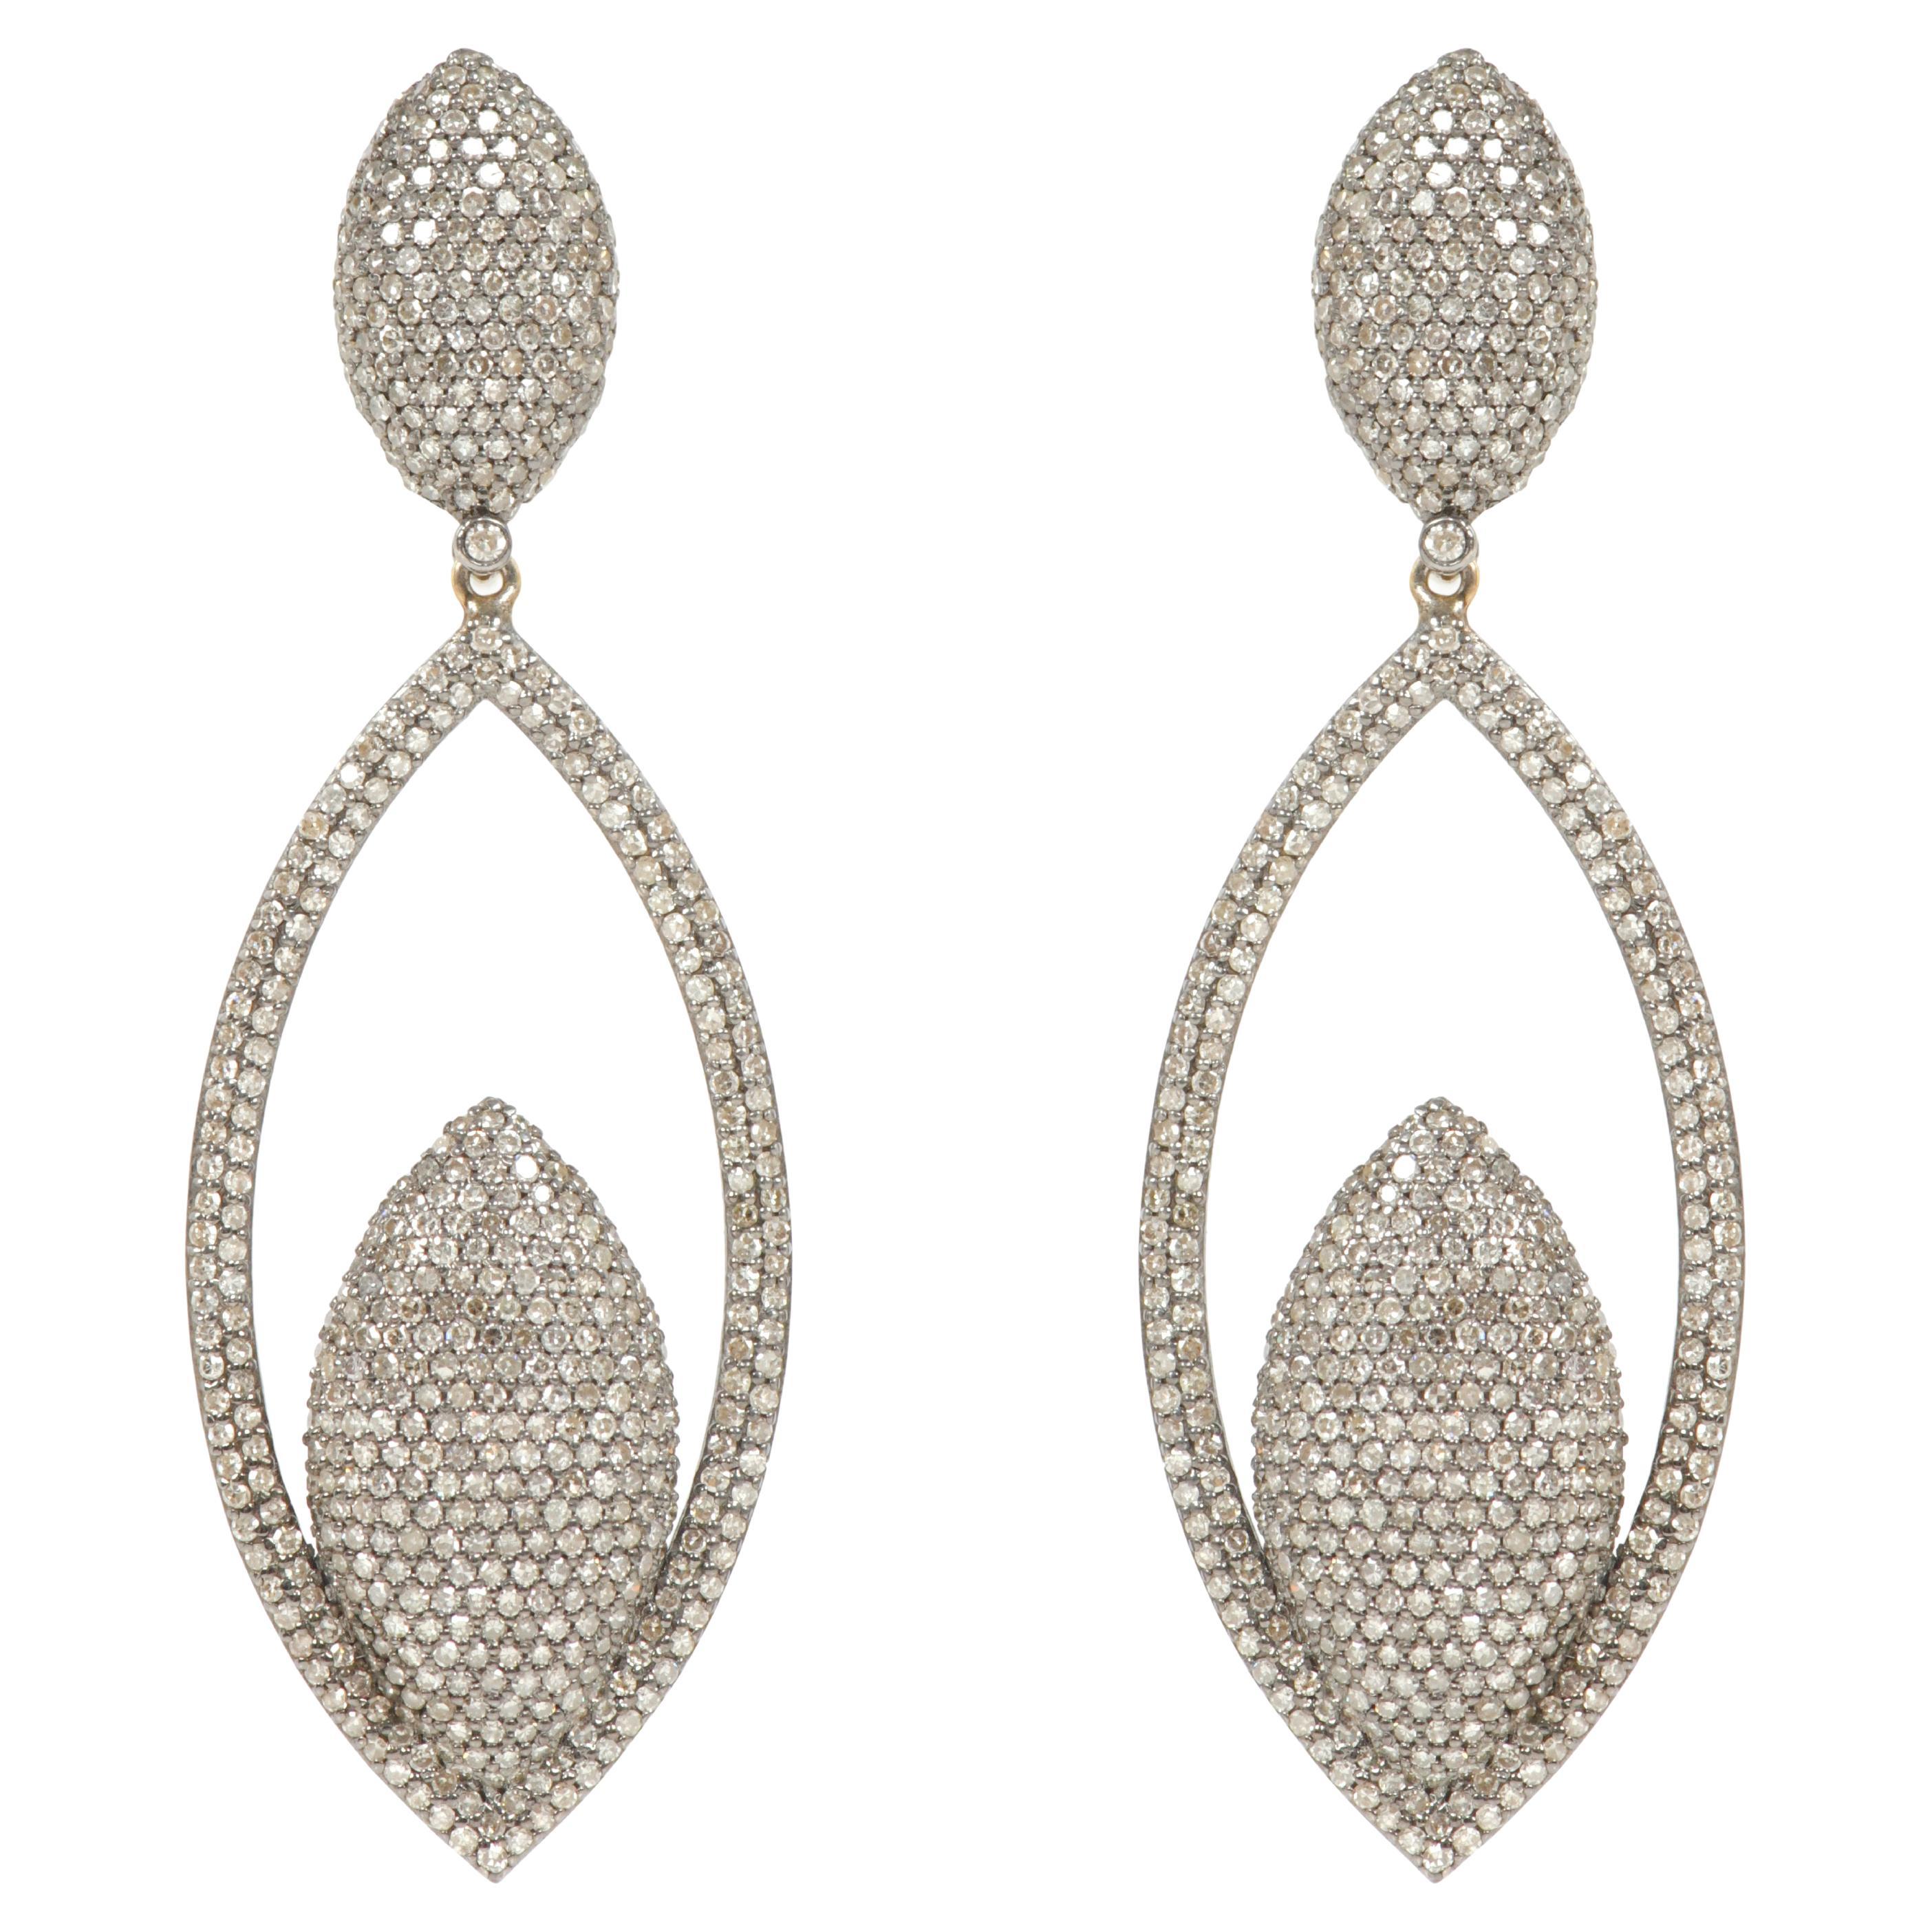 4.81 Carat Pave Diamond Cocktail Drop Earrings in Victorian Style